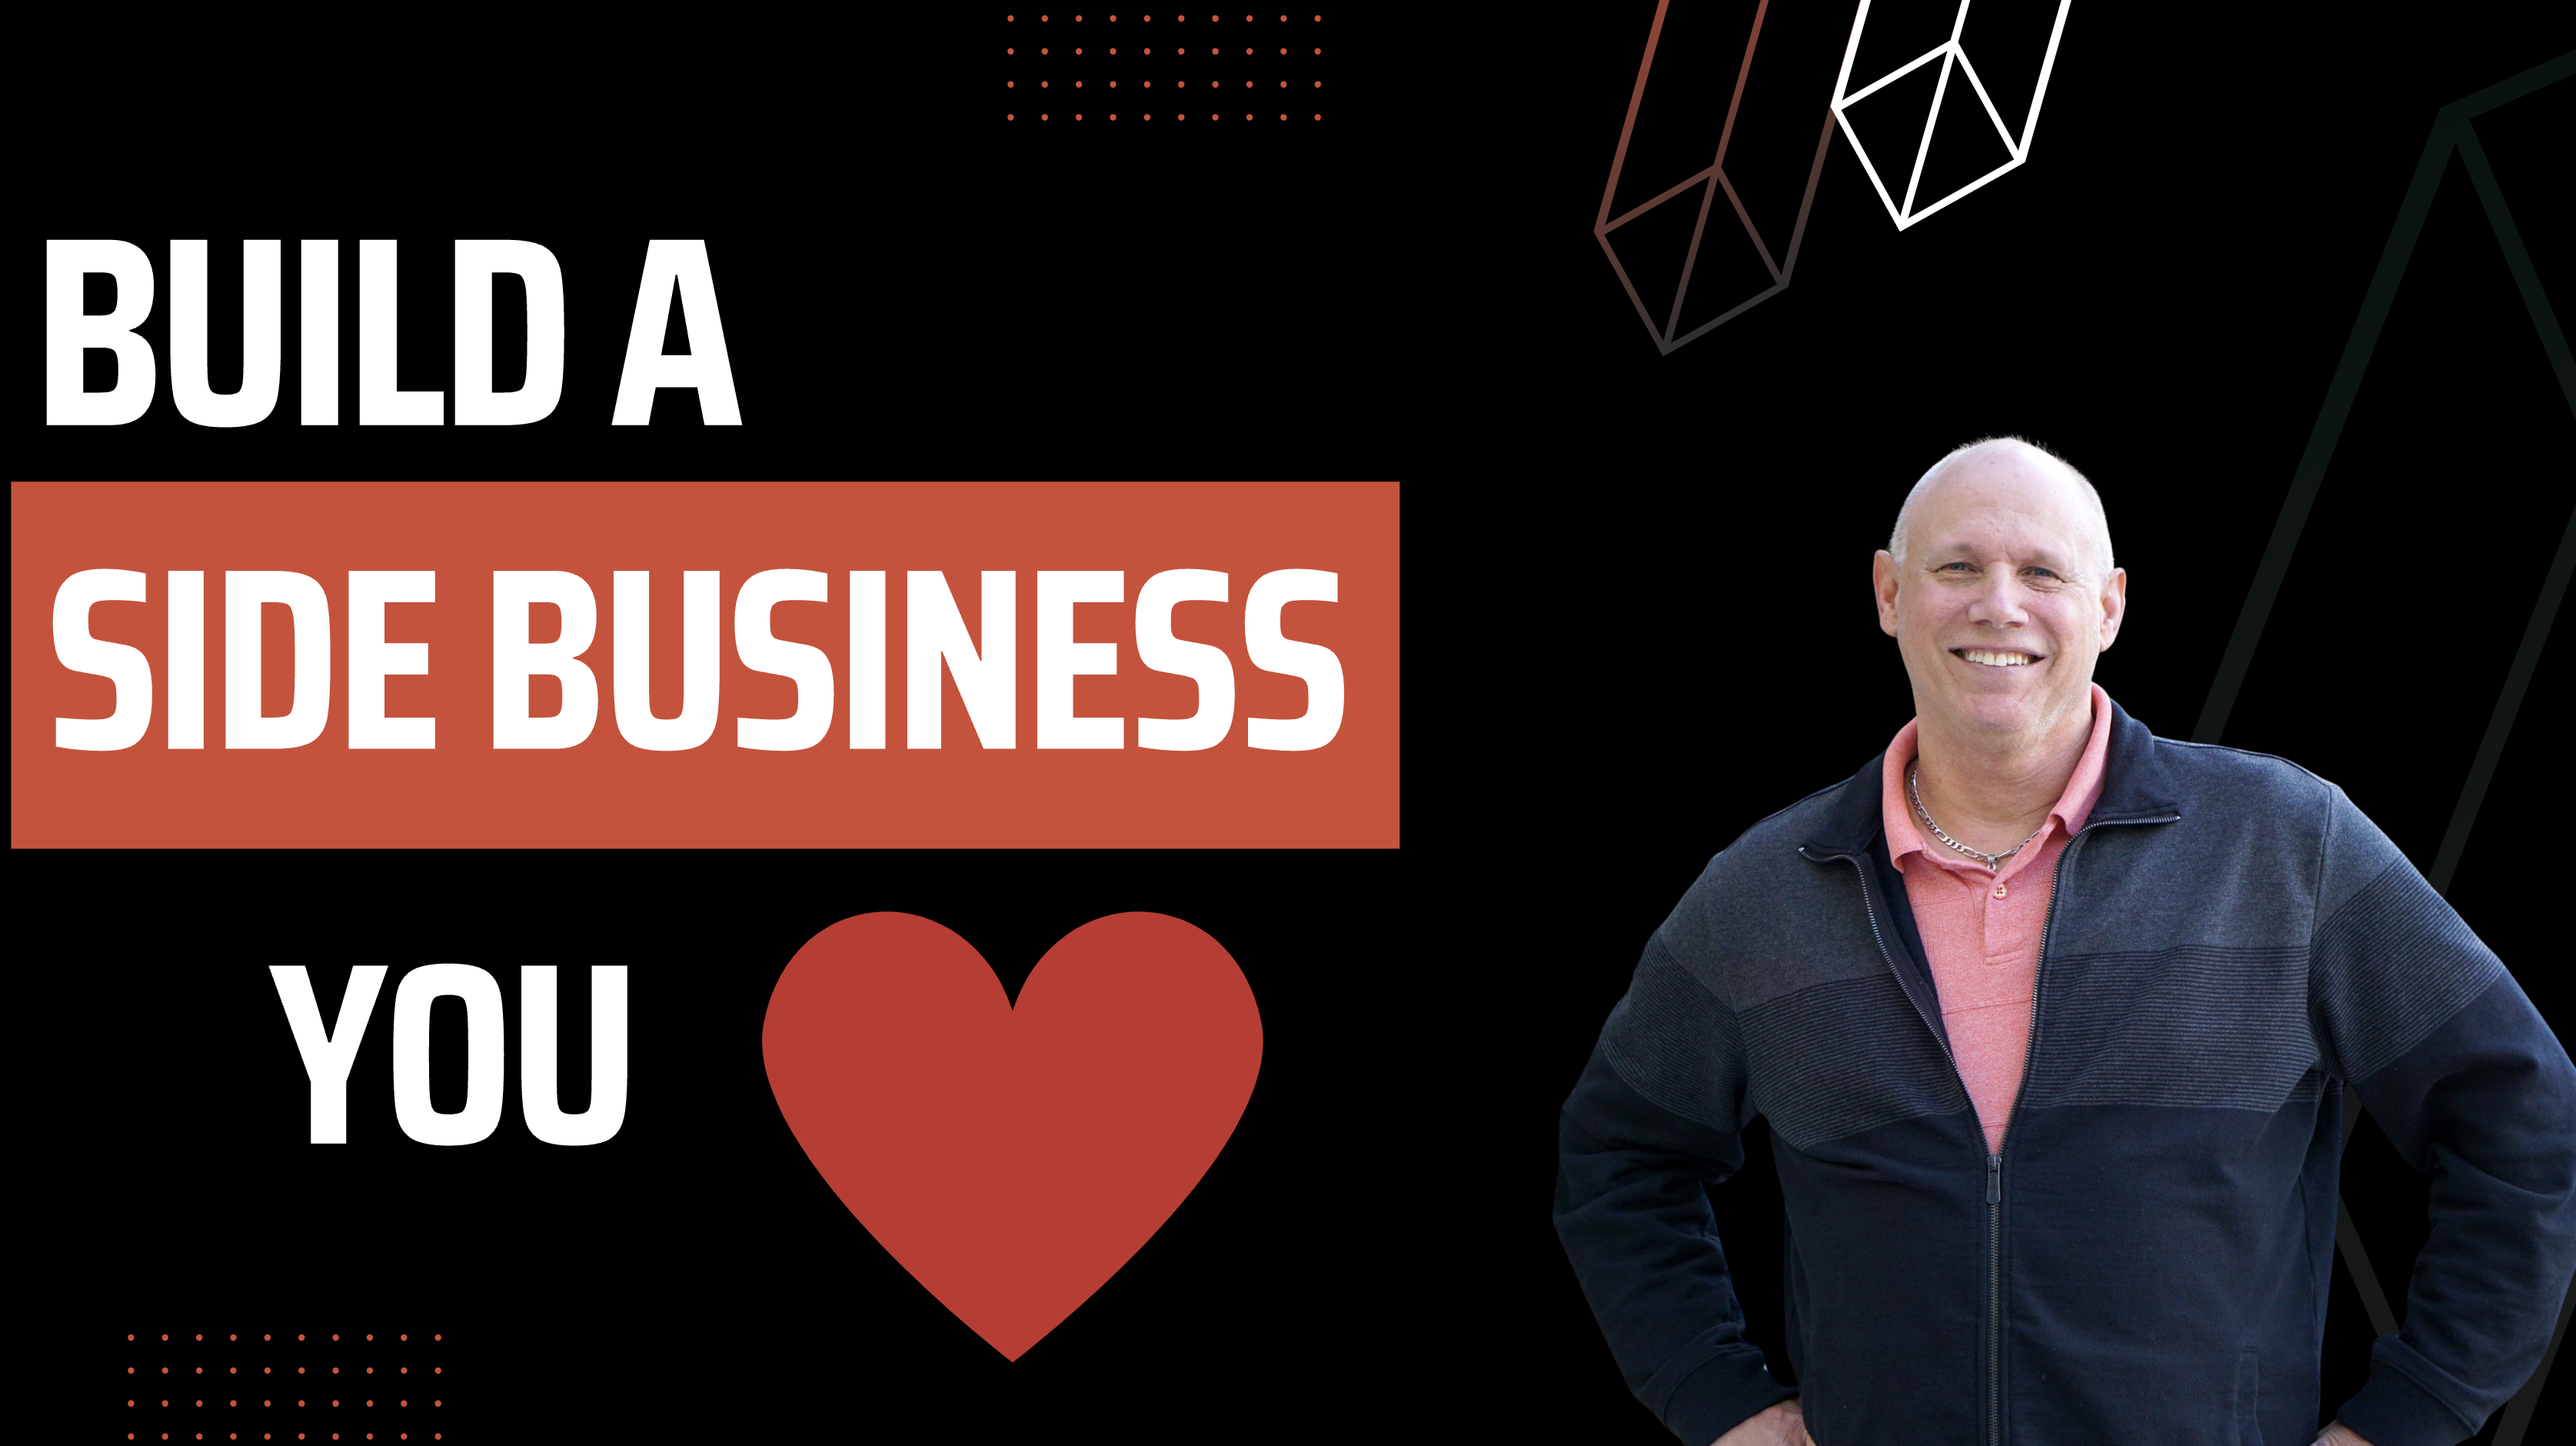 7 Questions For Building A Side Business You Love